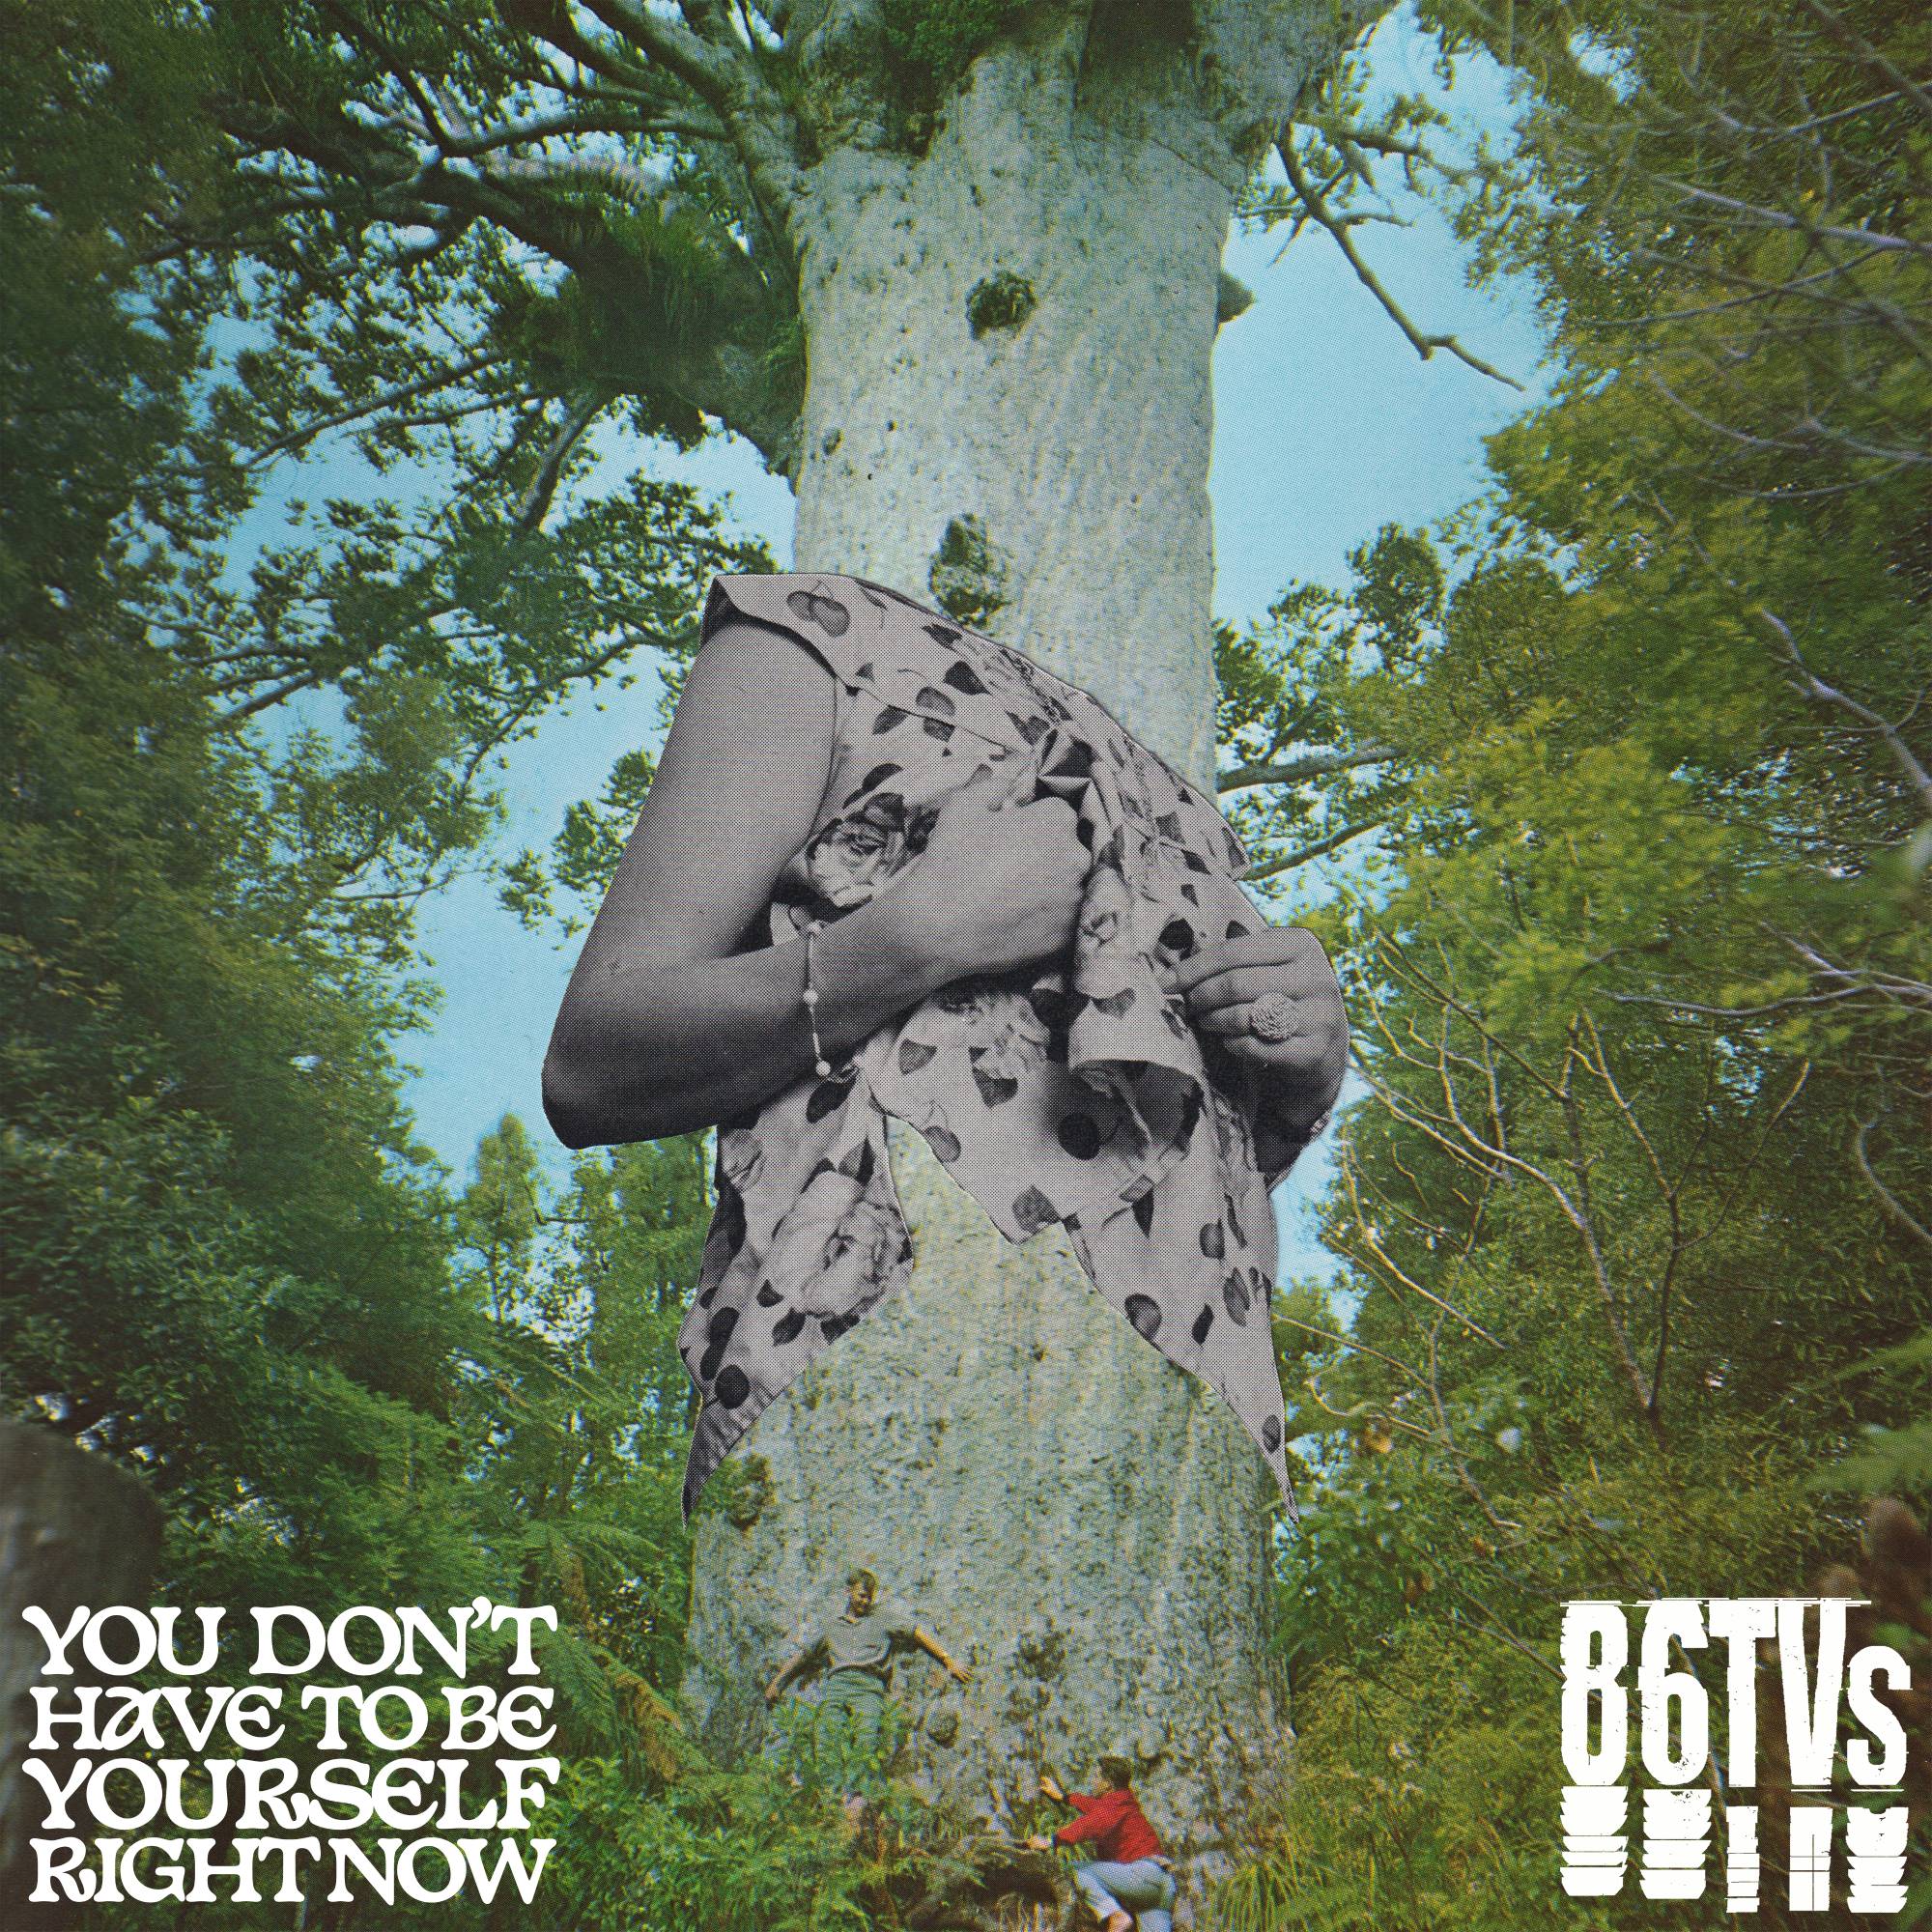 86TVs - You Don't Have To Be Yourself Right Now EP